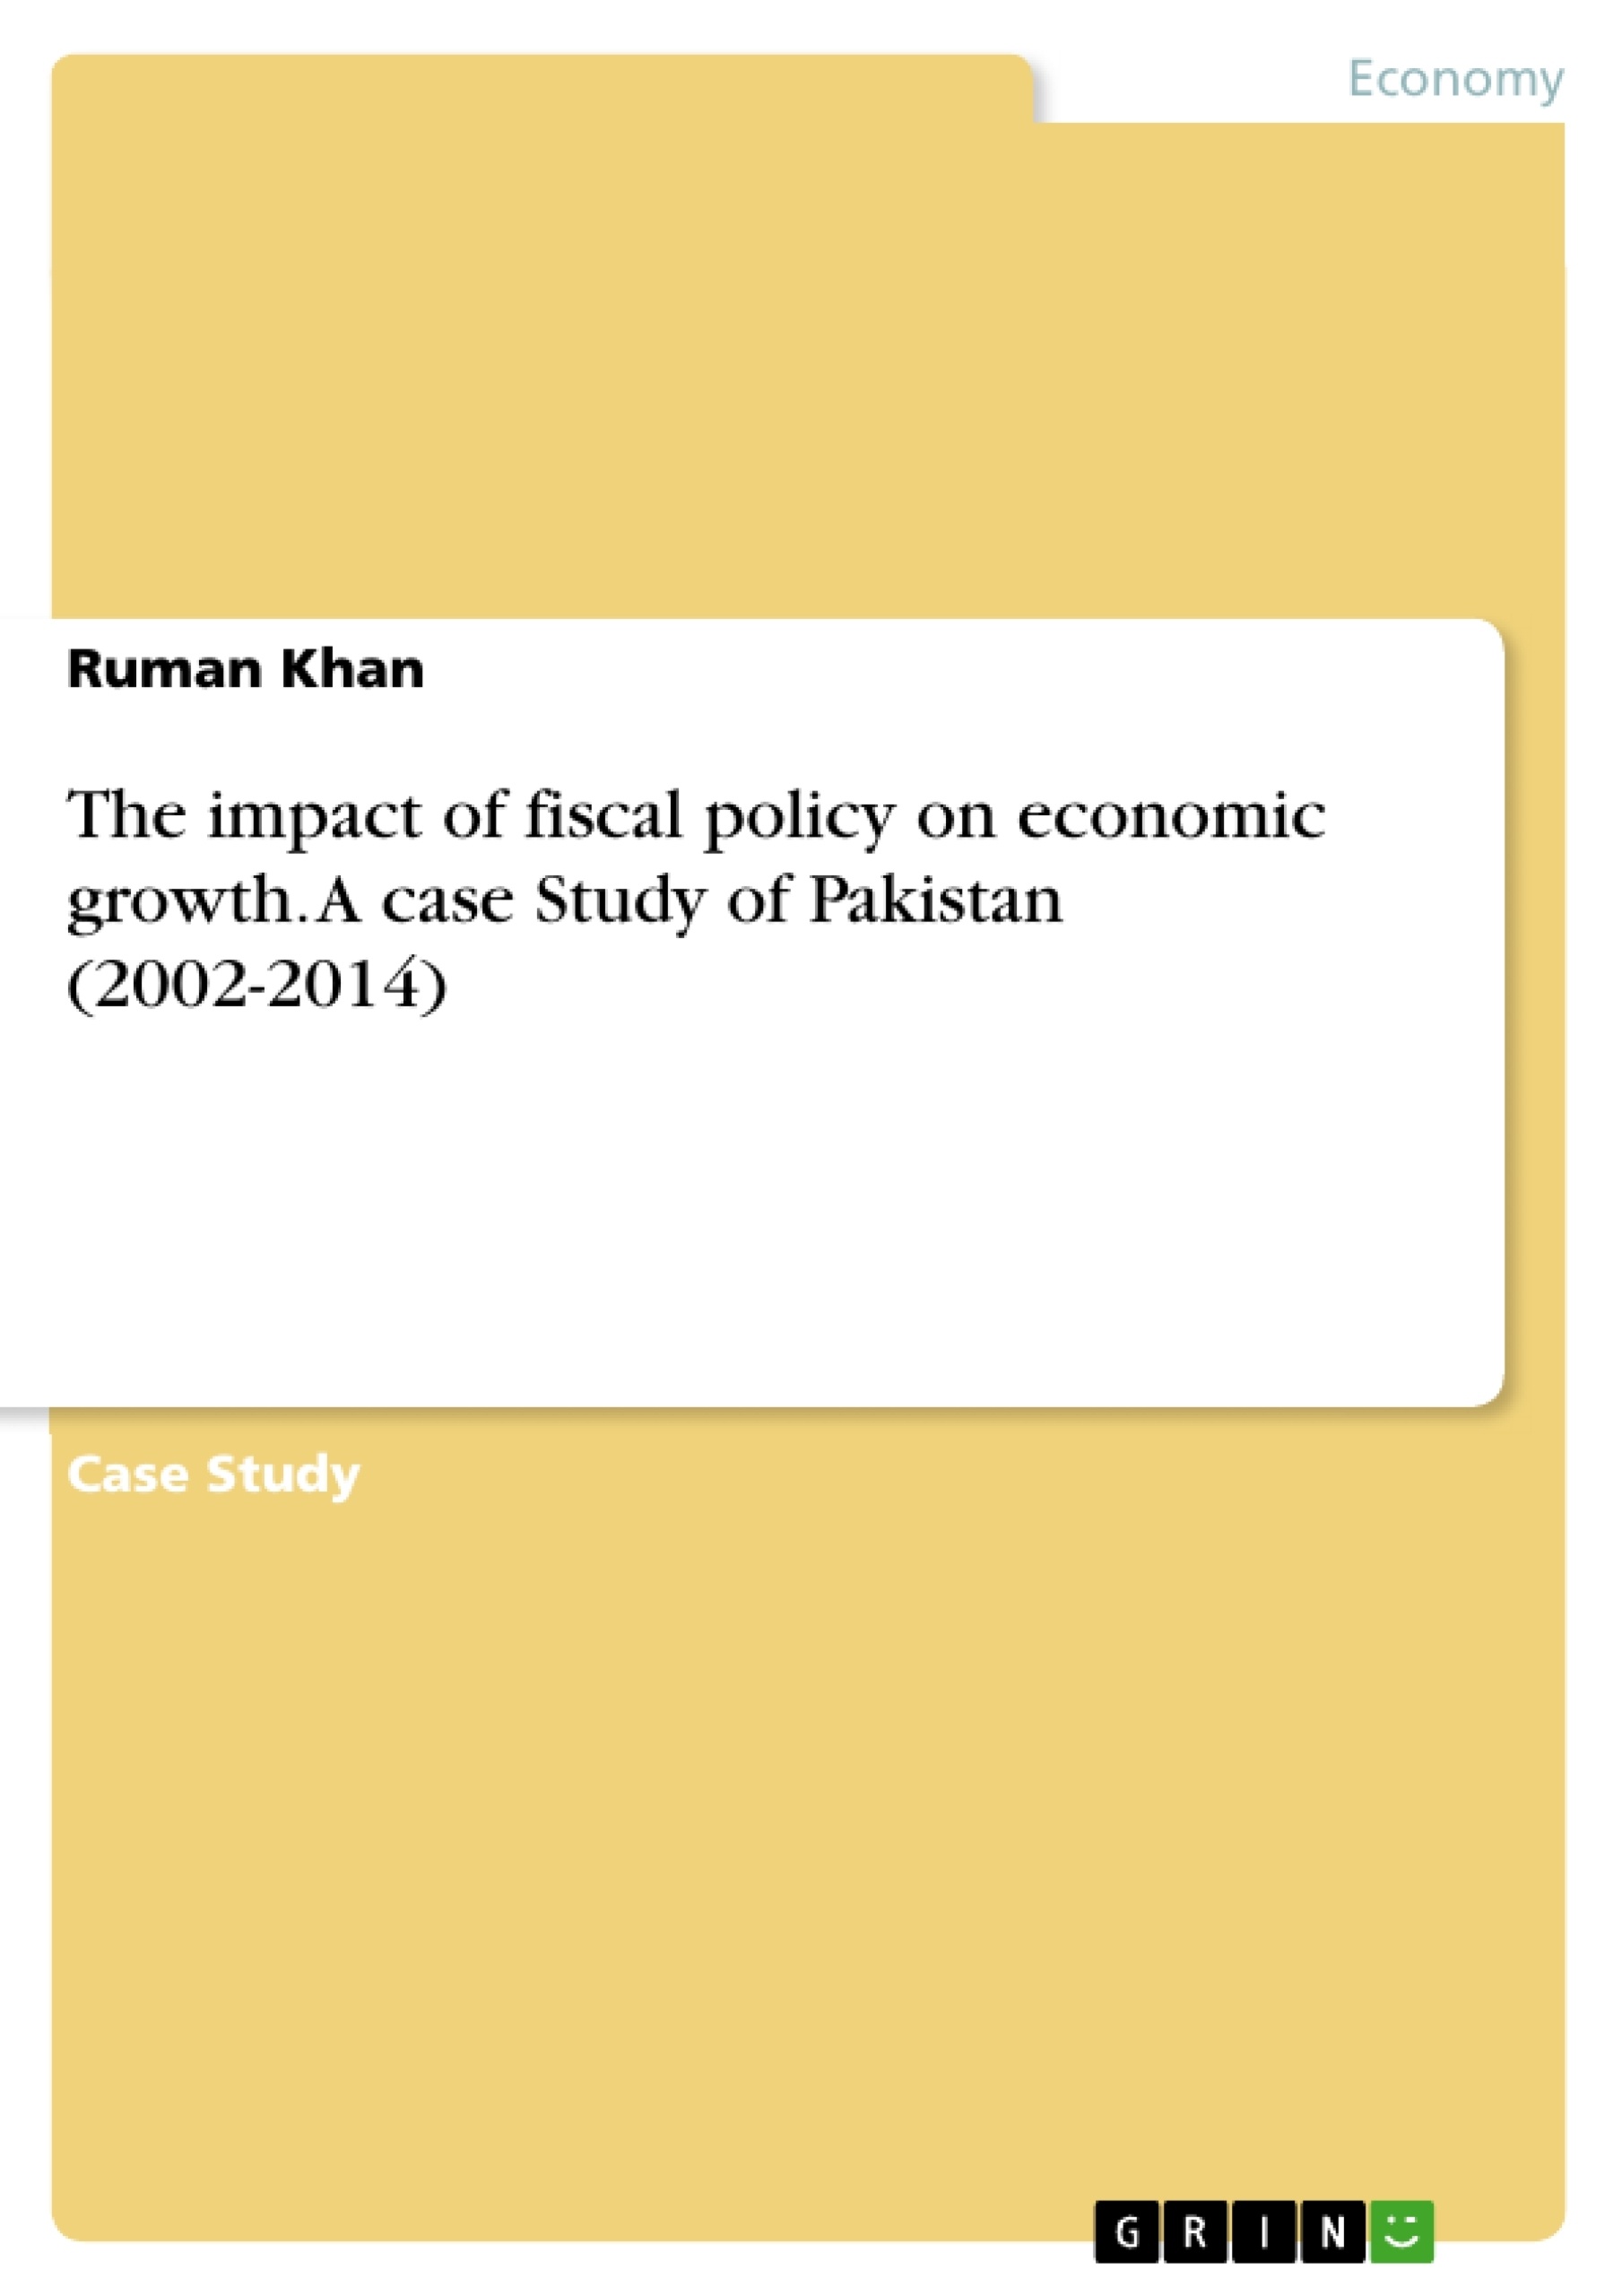 Title: The impact of fiscal policy on economic growth. A case Study of Pakistan (2002-2014)